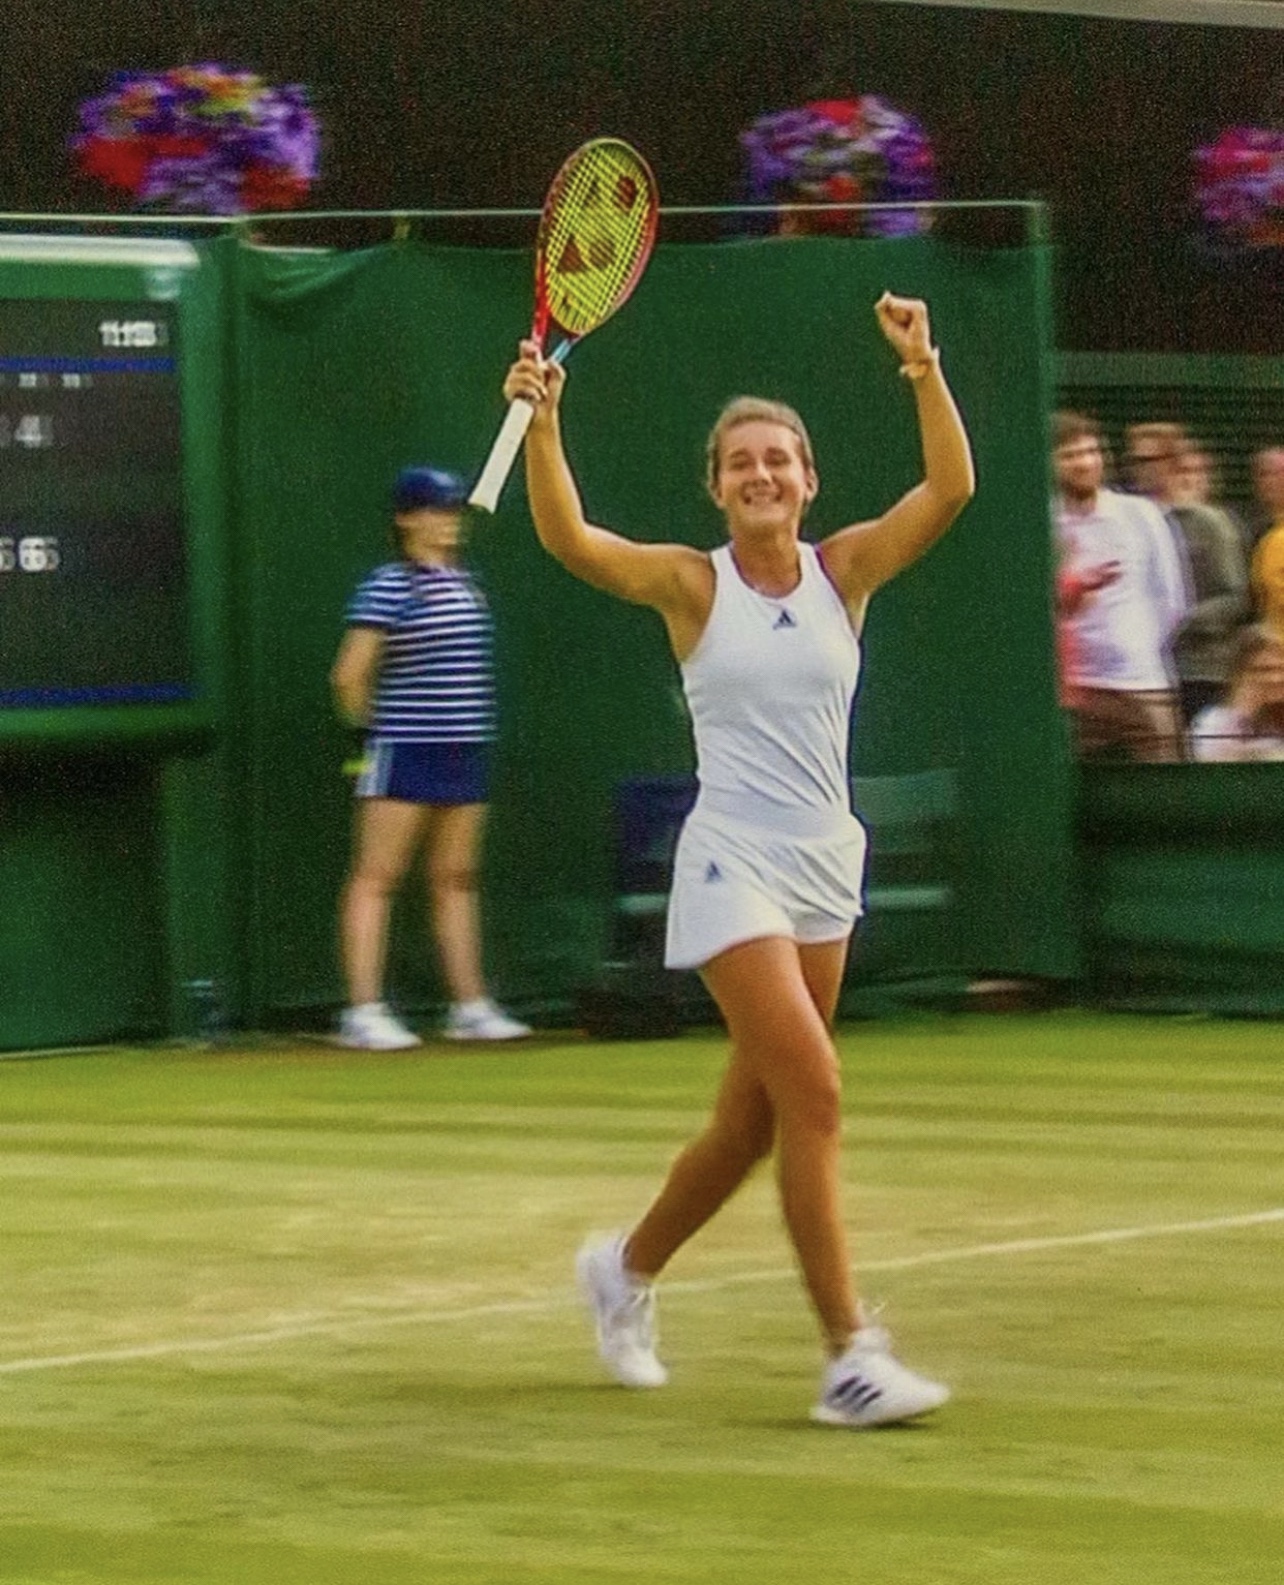 Olivia Lincer Does Great at Wimbledon